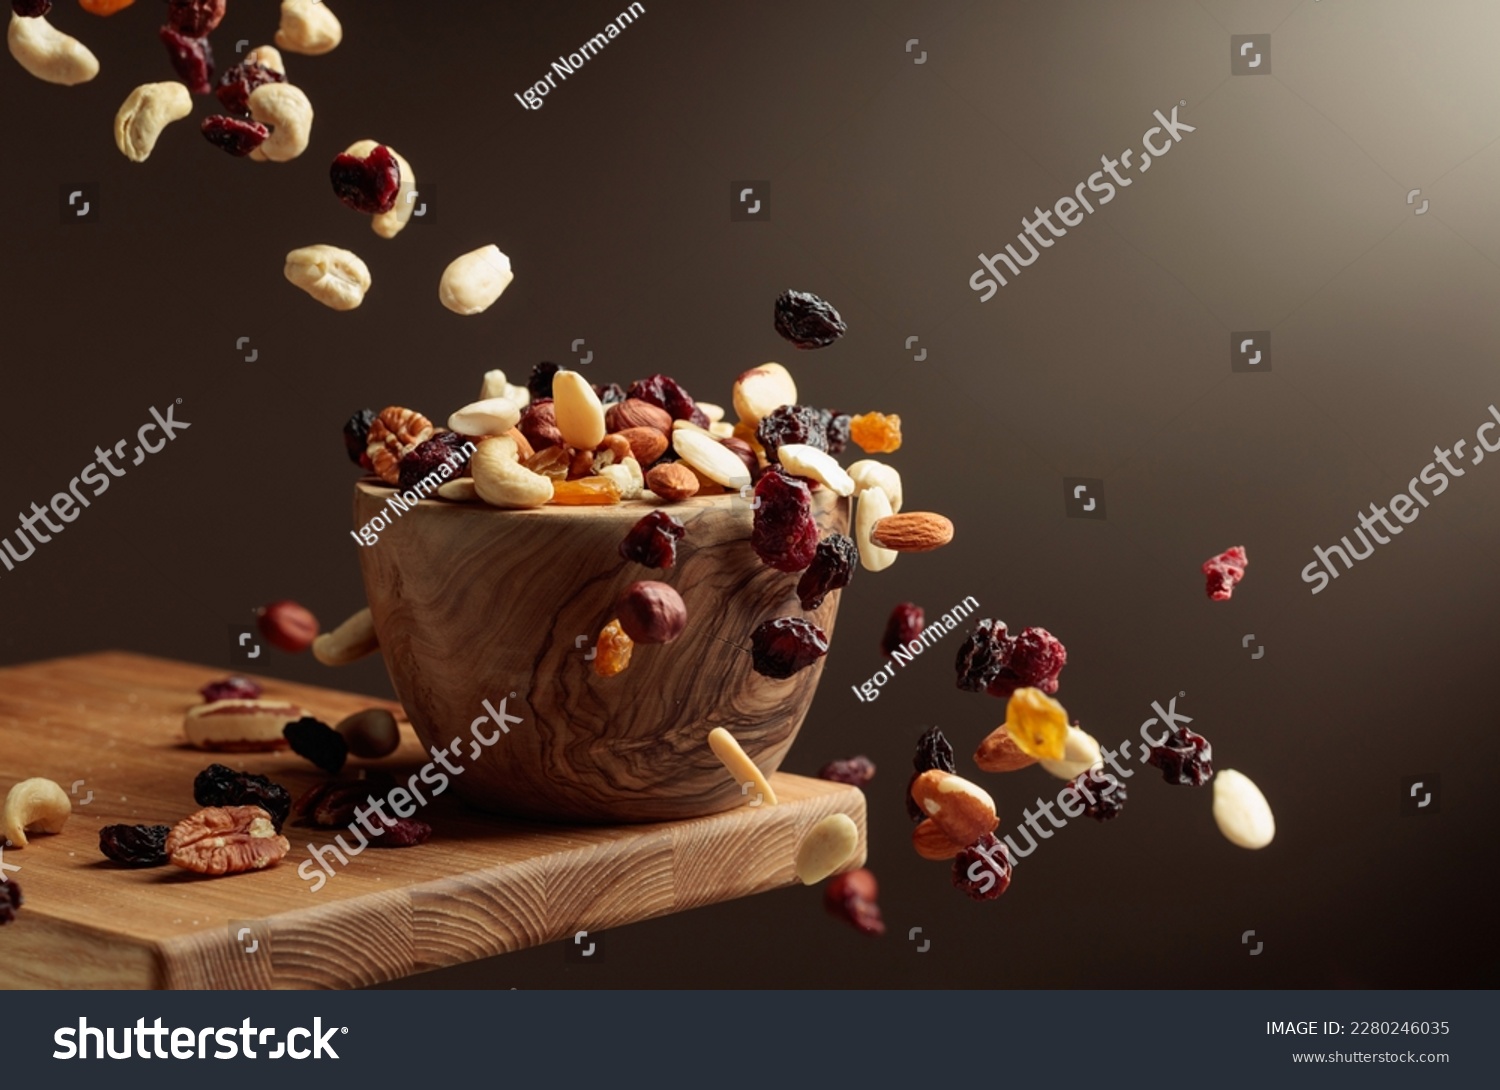 Flying dried fruits and nuts. The mix of nuts and dried berries are in a wooden bowl.  #2280246035